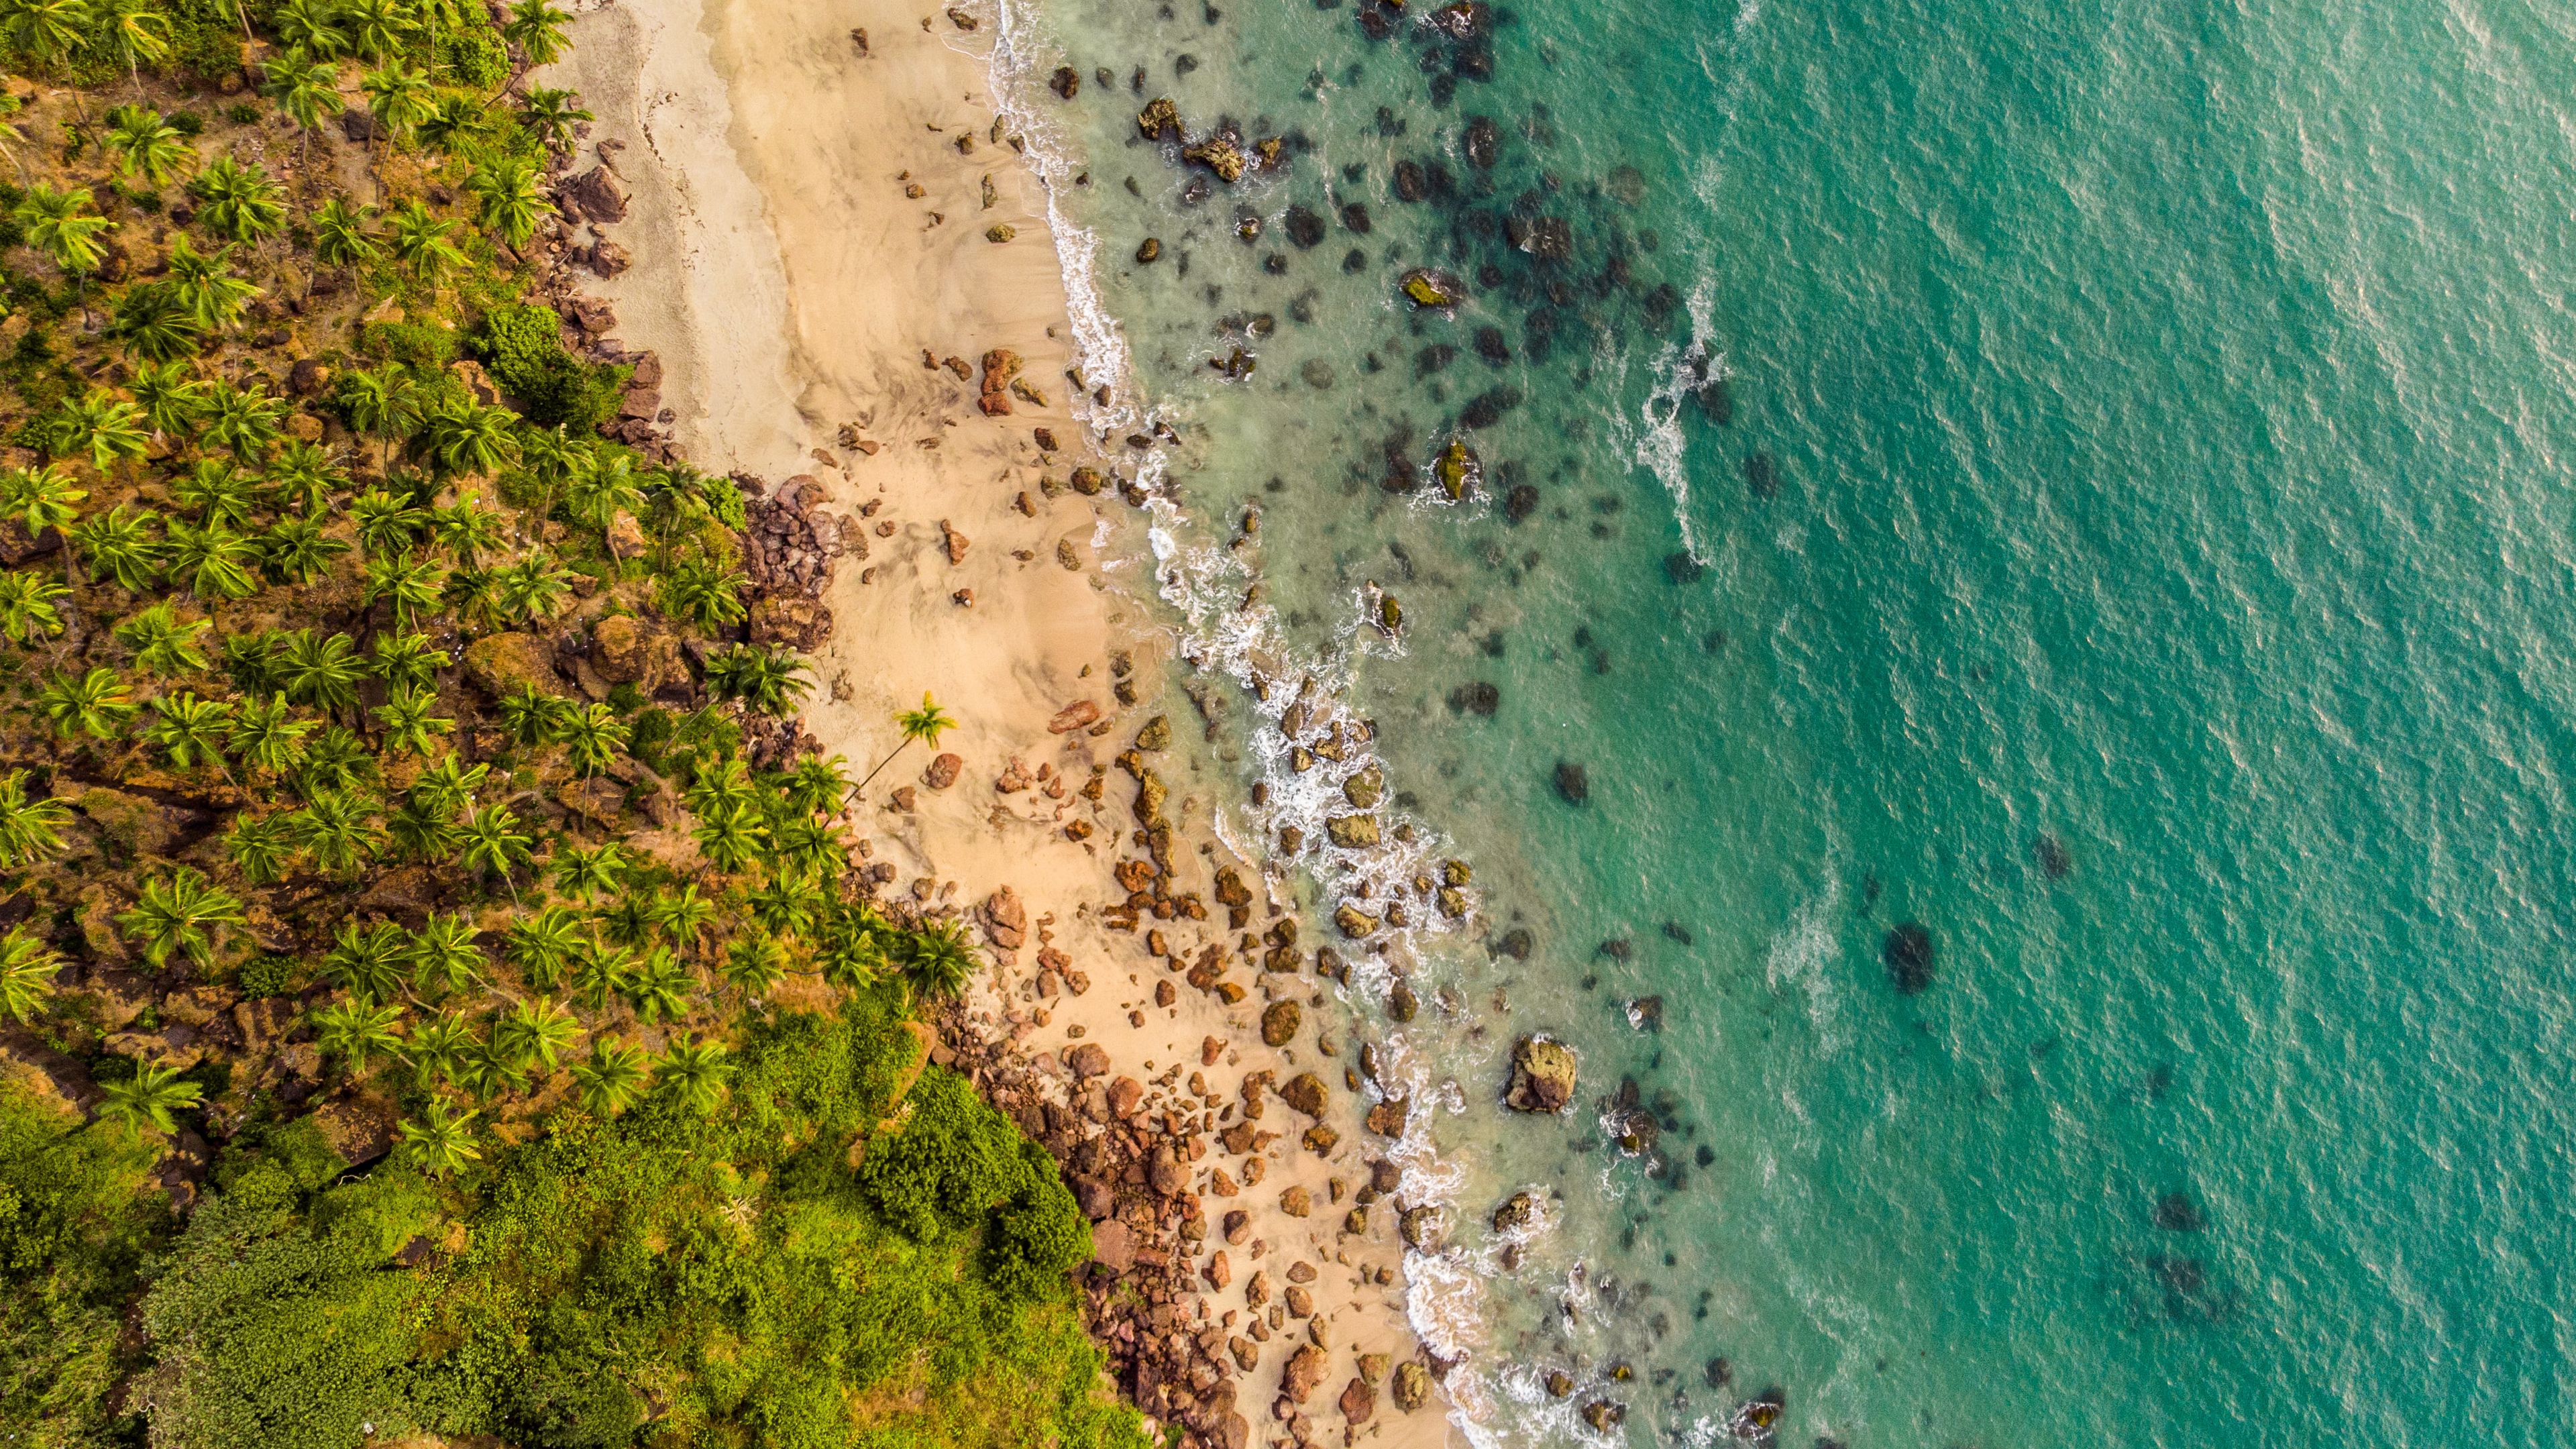 Download wallpaper 3840x2160 beach, aerial view, shore, trees, sand 4k uhd 16:9 HD background